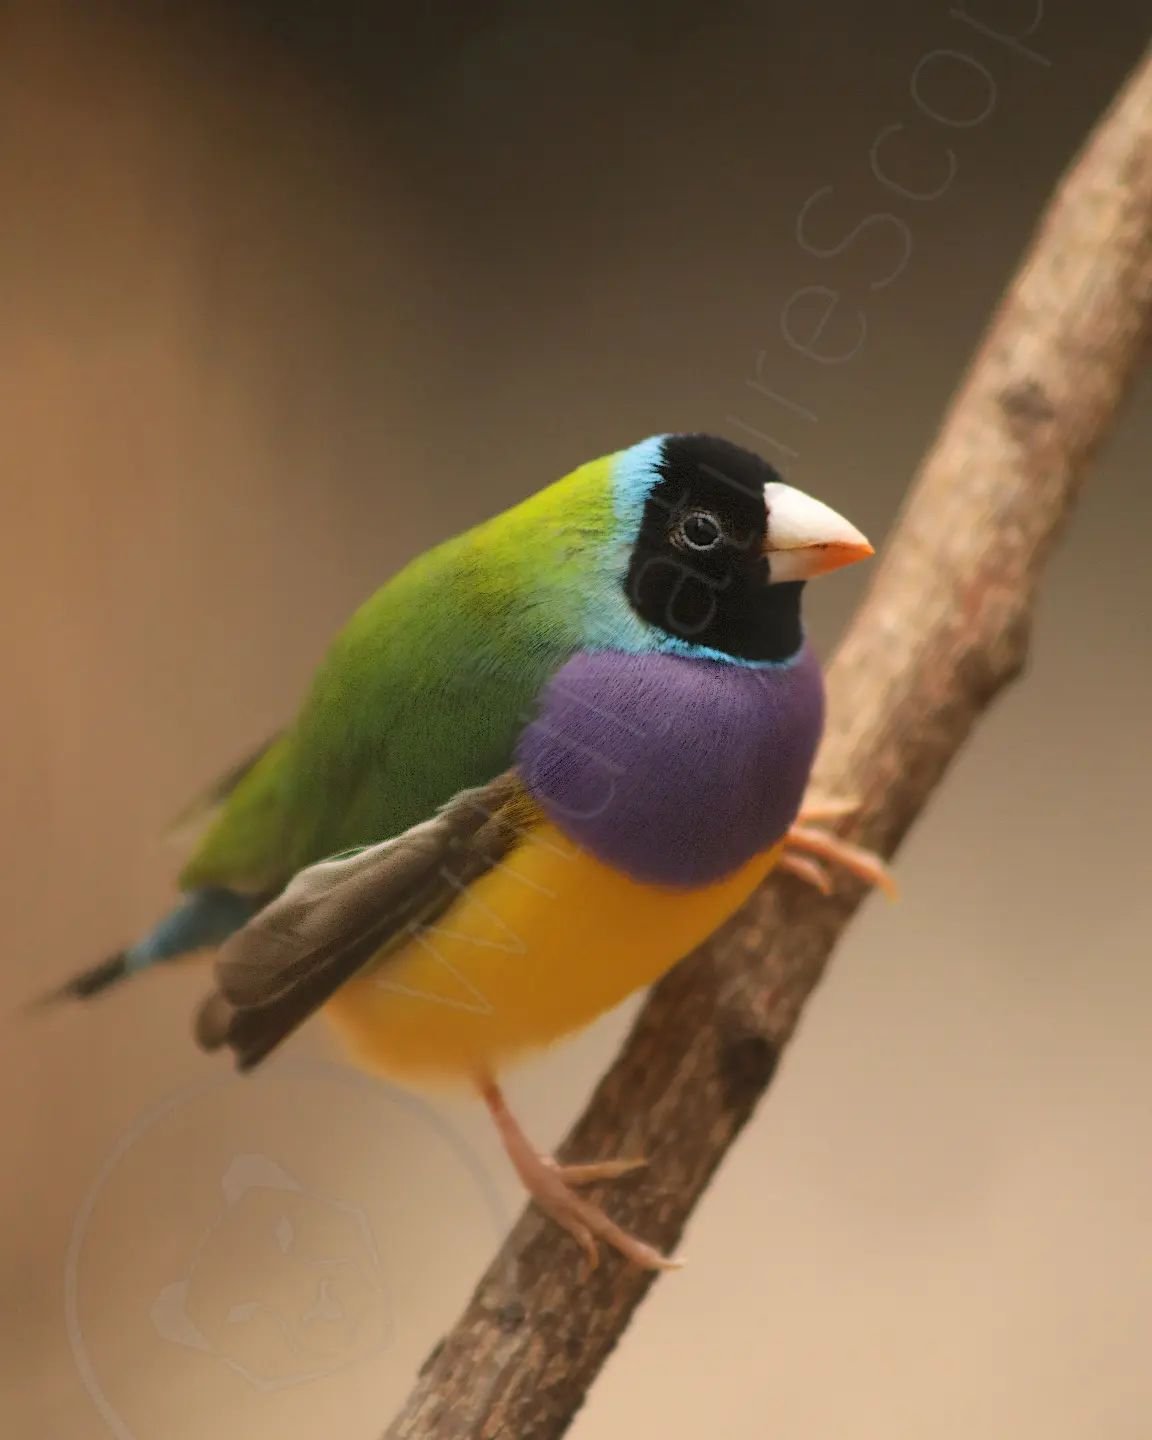 The Gouldian Finch is a small native Australian bird between 12-14cm (4.7-5.5in), with either black, yellow, or red heads, with the males having dark purple chests and the females having light purple chests. They are endangered and only found in smal